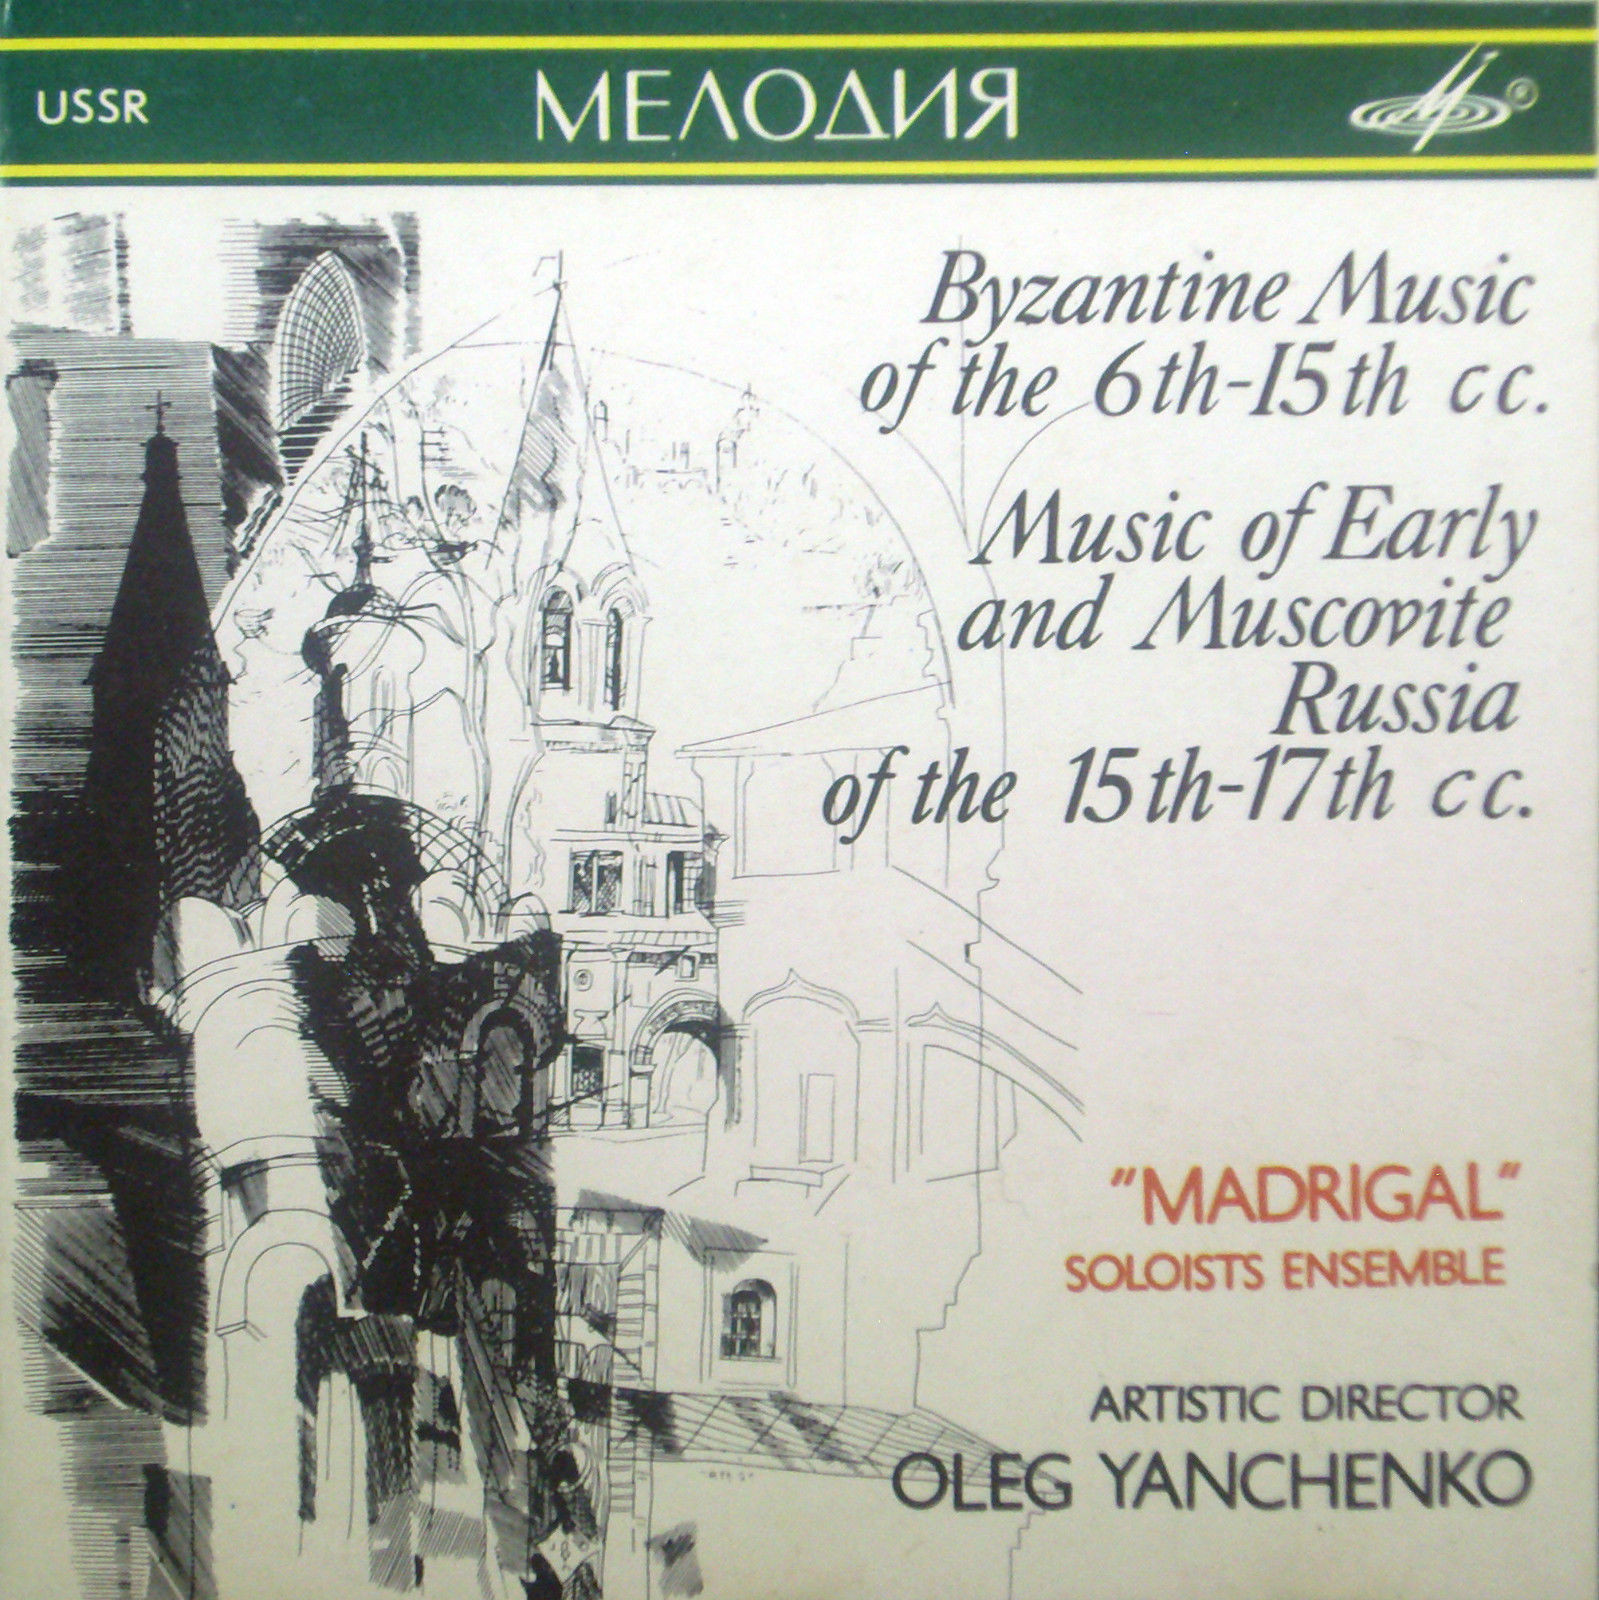 Byzantine Music of the 6th-15th cc. / Music of Early & Muscovite Russia of the 15th-17th cc. - "Madrigal" Yanchenko